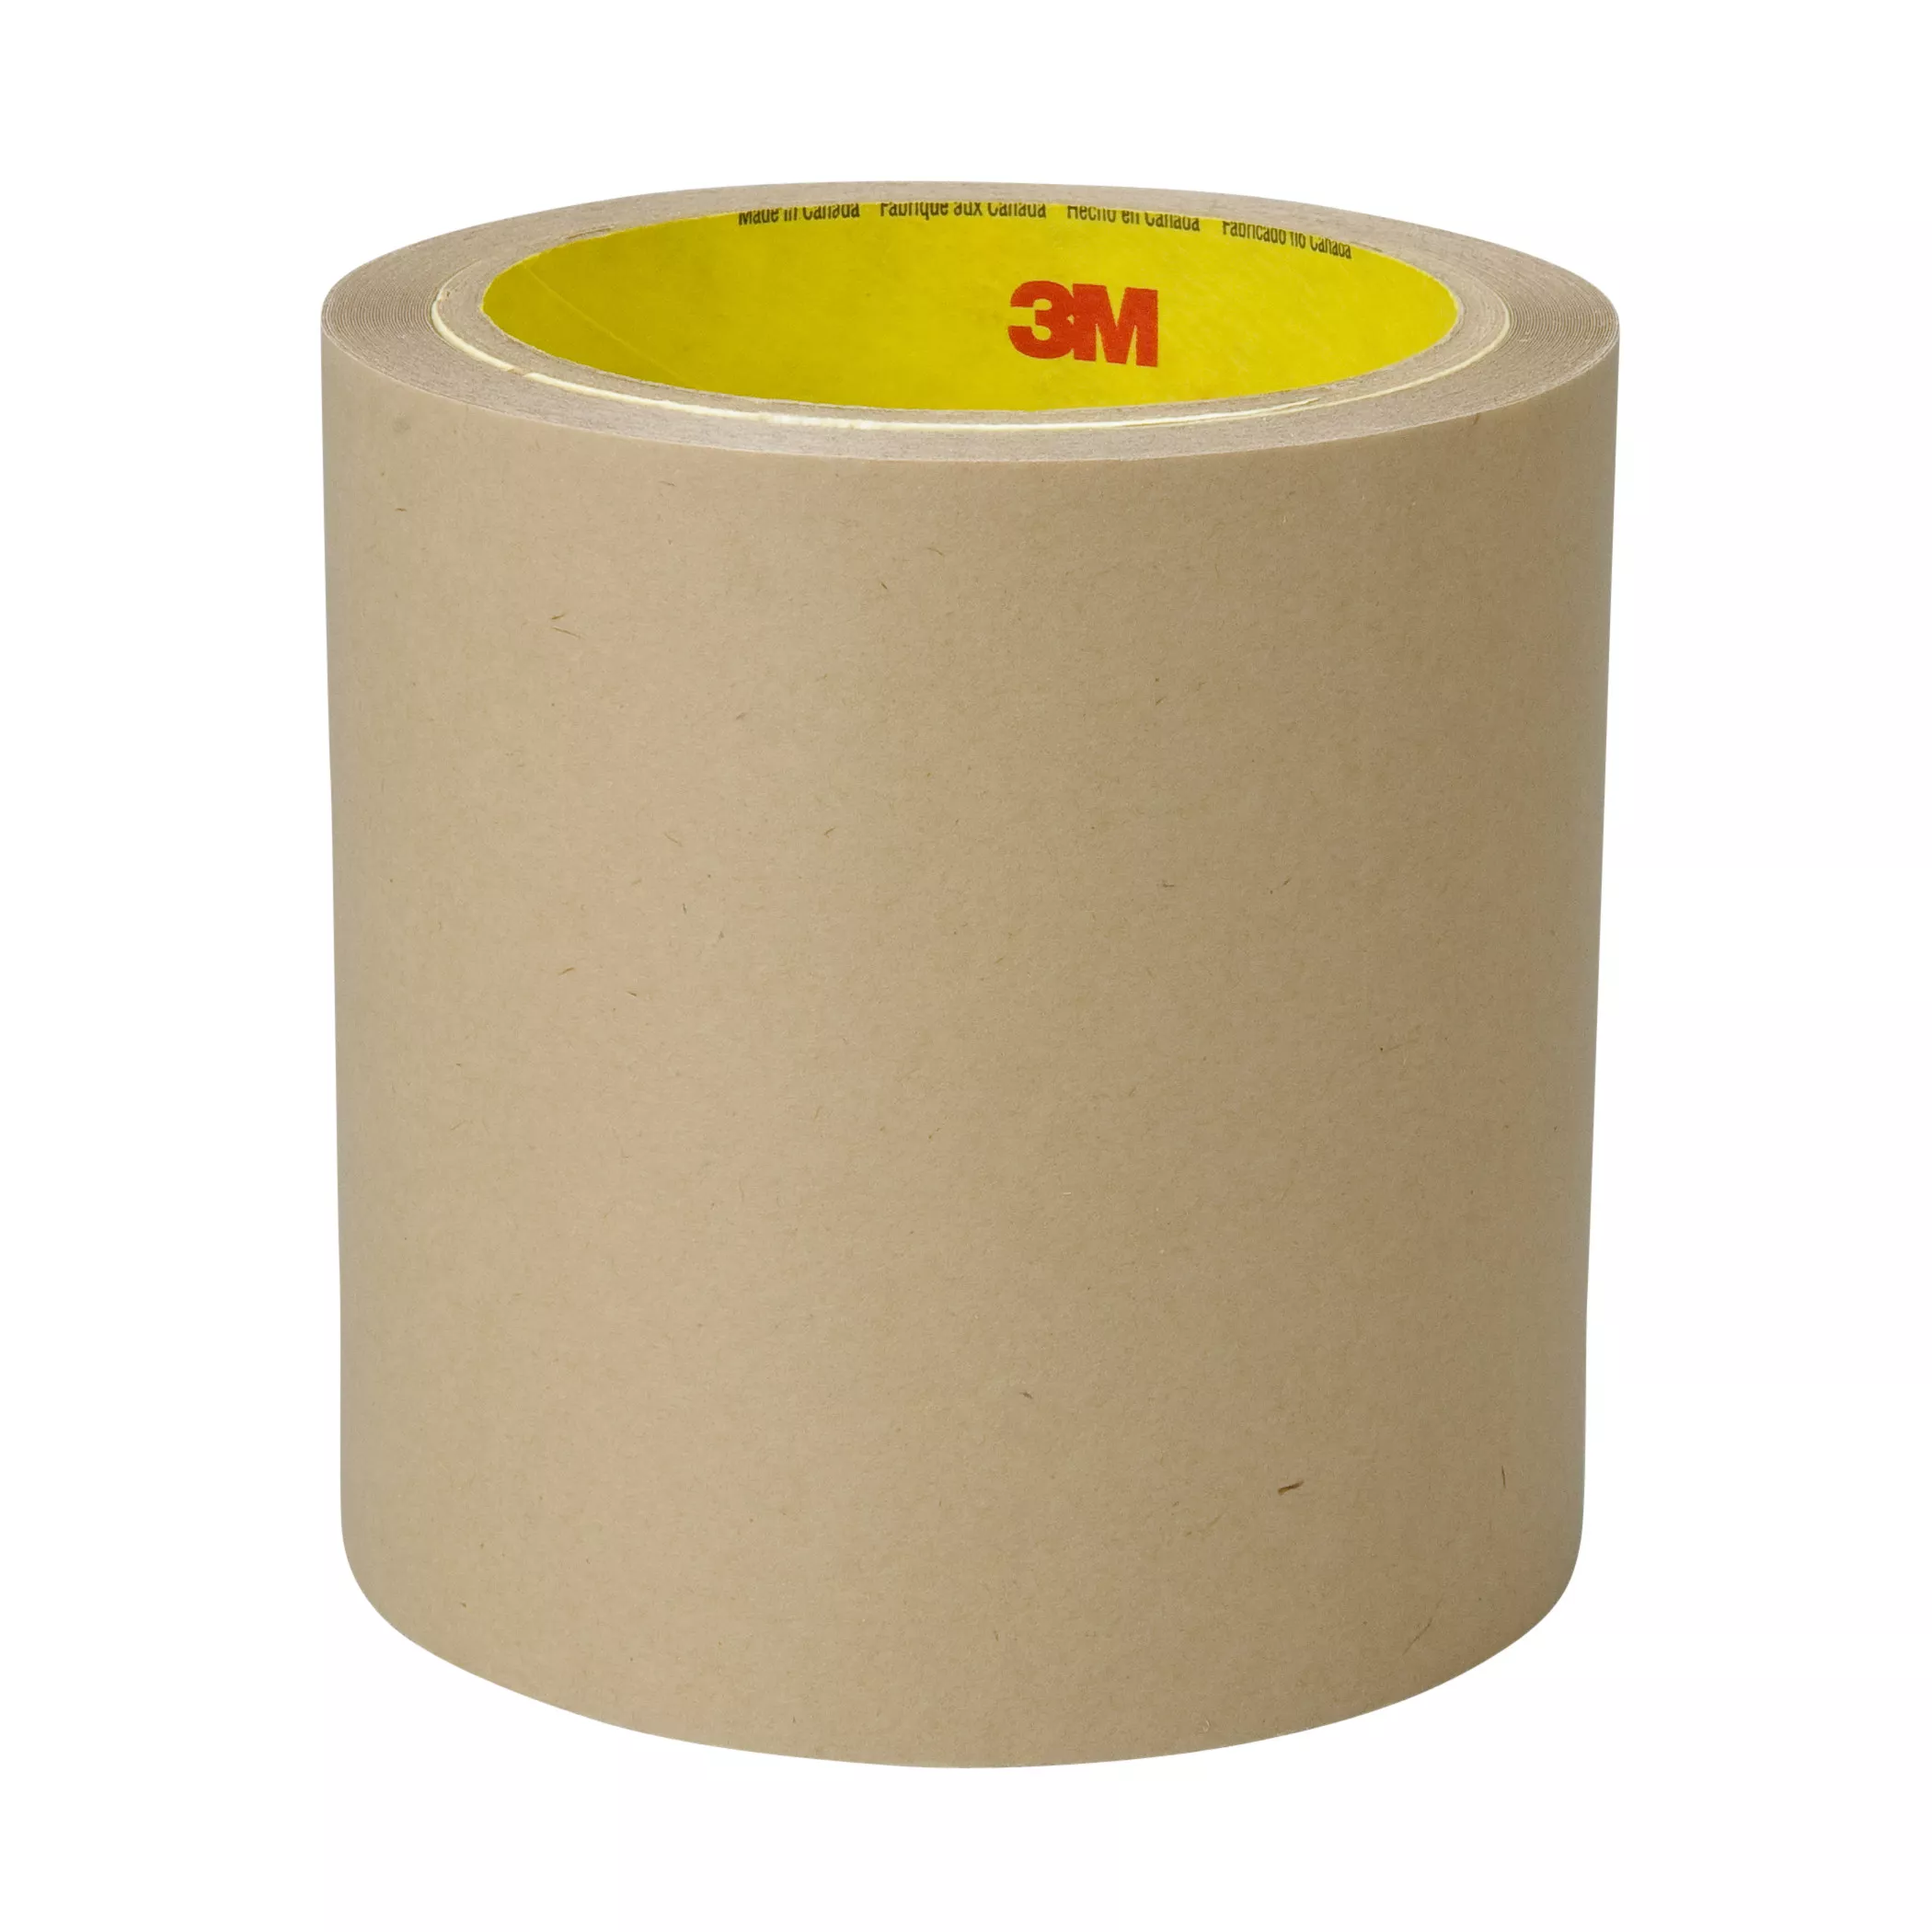 3M™ Double Coated Tape 9500PC, Clear, 12 in x 36 yd, 5.6 mil, 4
Roll/Case